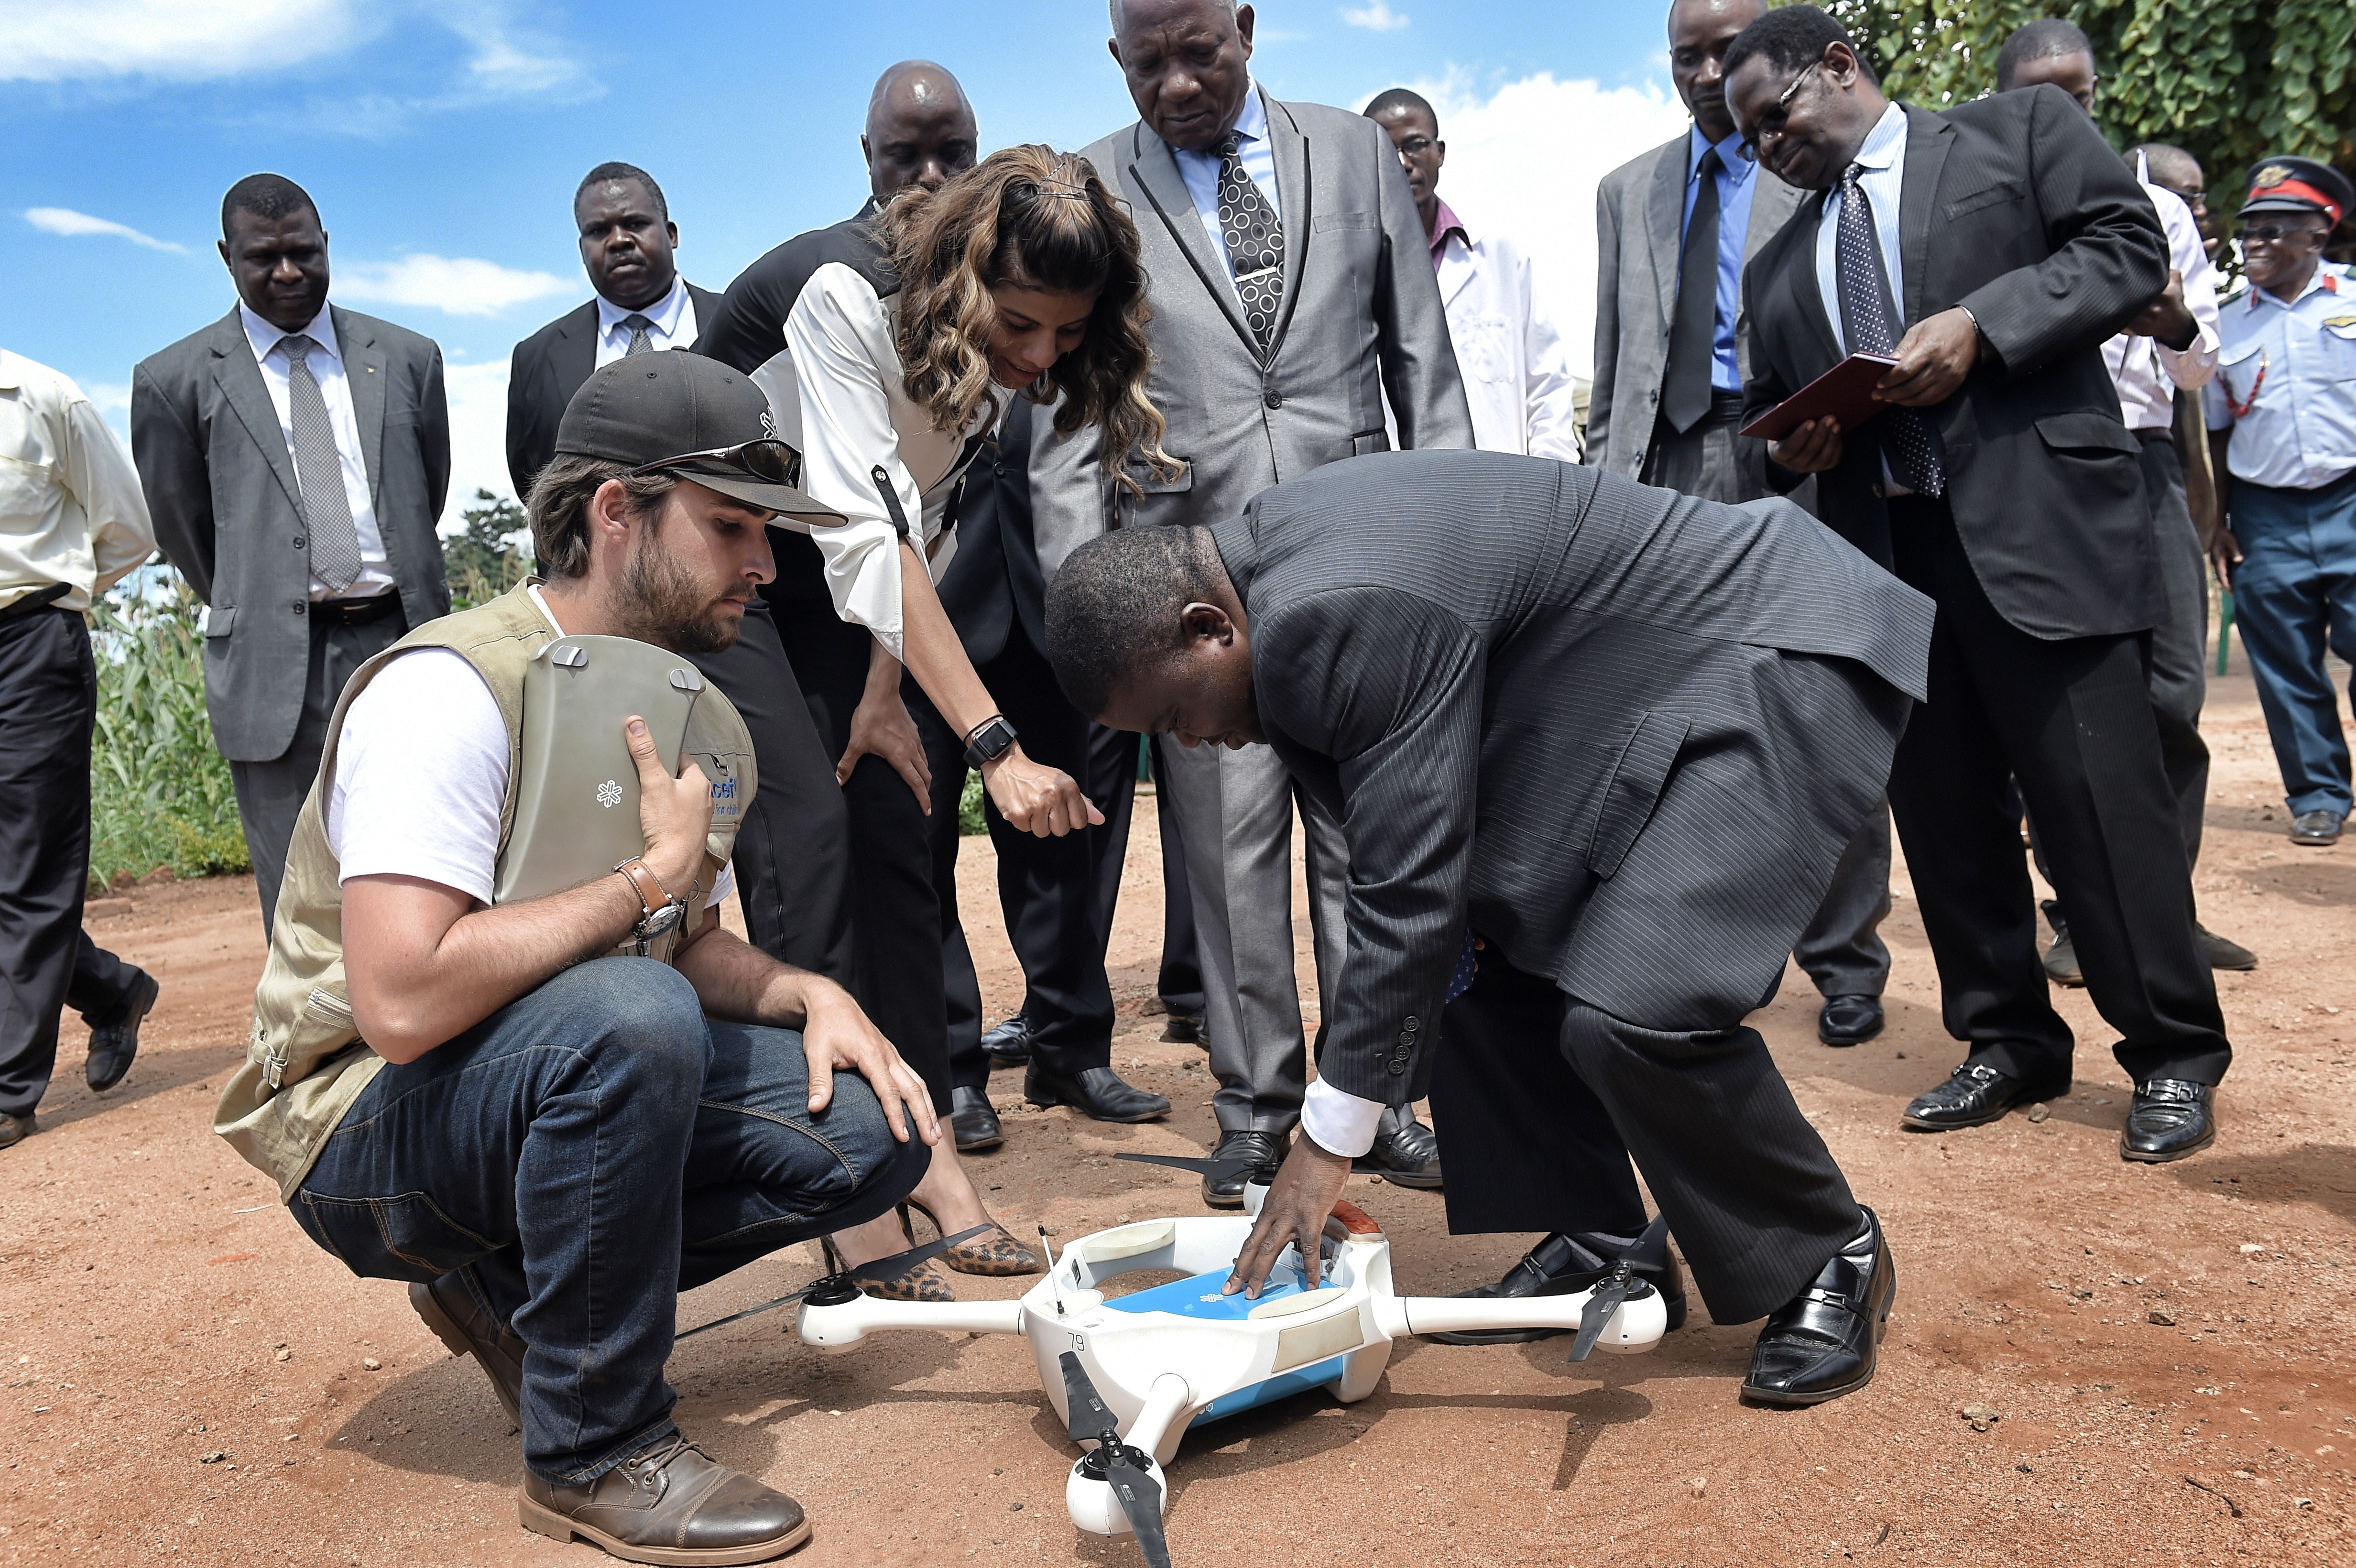 On the day of the inaugural test launch at Kamuzu Central Hospital, Dr. Peter Kumpalume, Malawi’s Minister of Health, works with drone technician Brandon Landry to get ready for launch. 